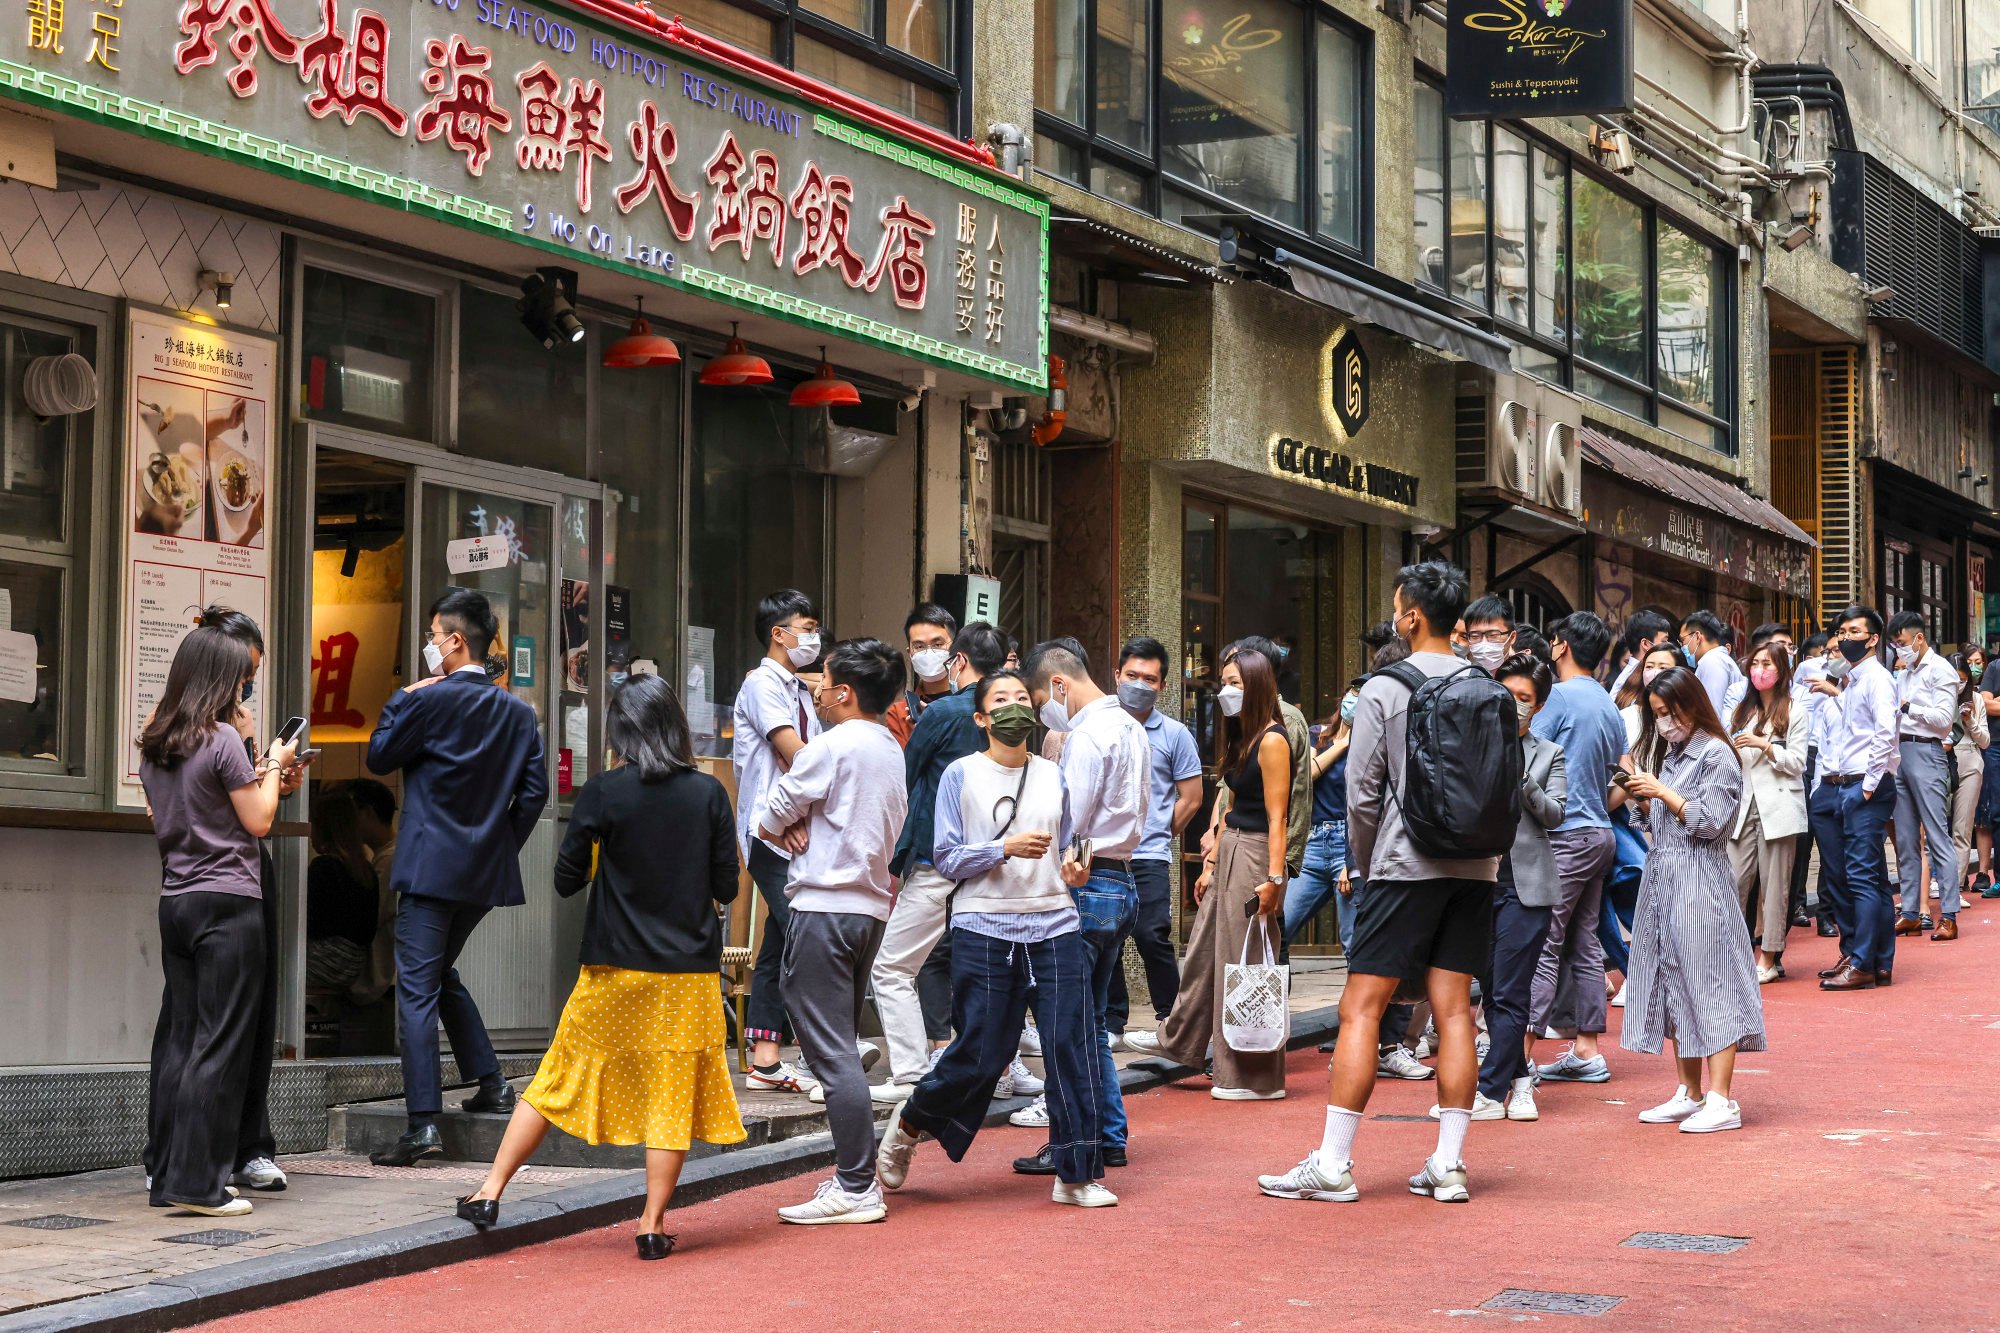 Diners queue outside a restaurant in Hong Kong’s Lan Kwai Fong area on October 20, 2022. Photo: SCMP / Jonathan Wong